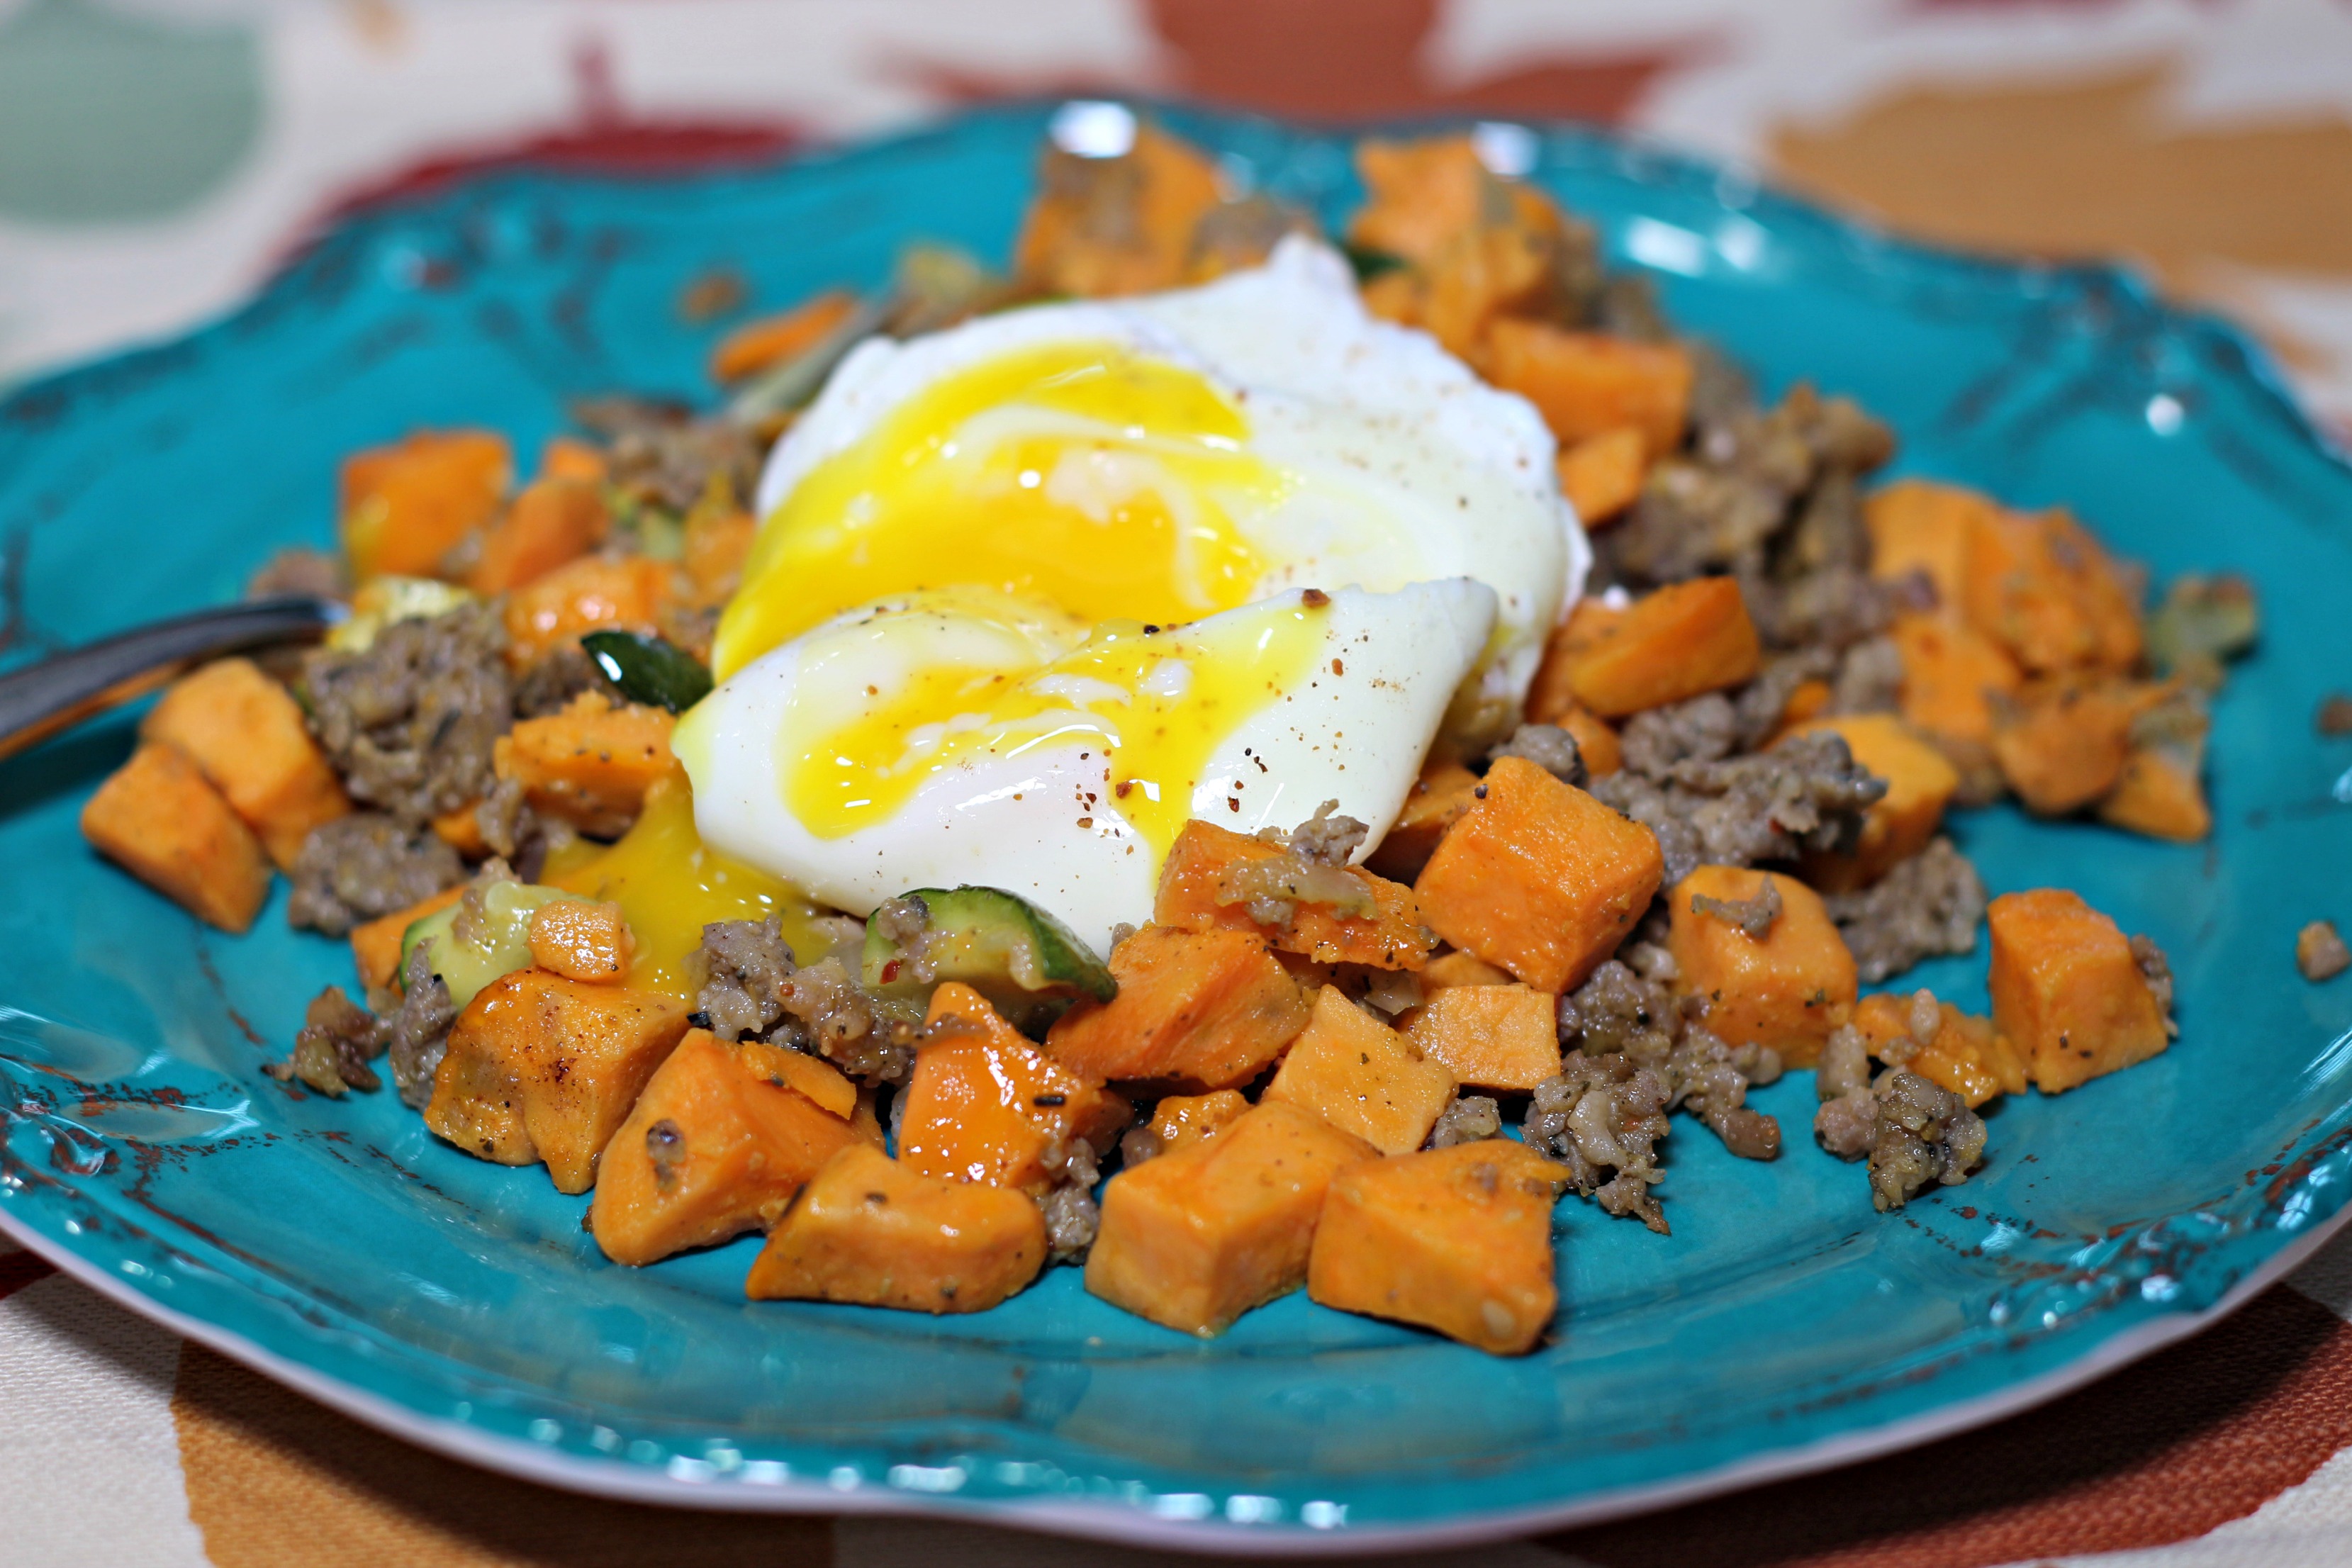 Savory sweet potato and sausage breakfast casserole|Ripped Jeans and Bifocals